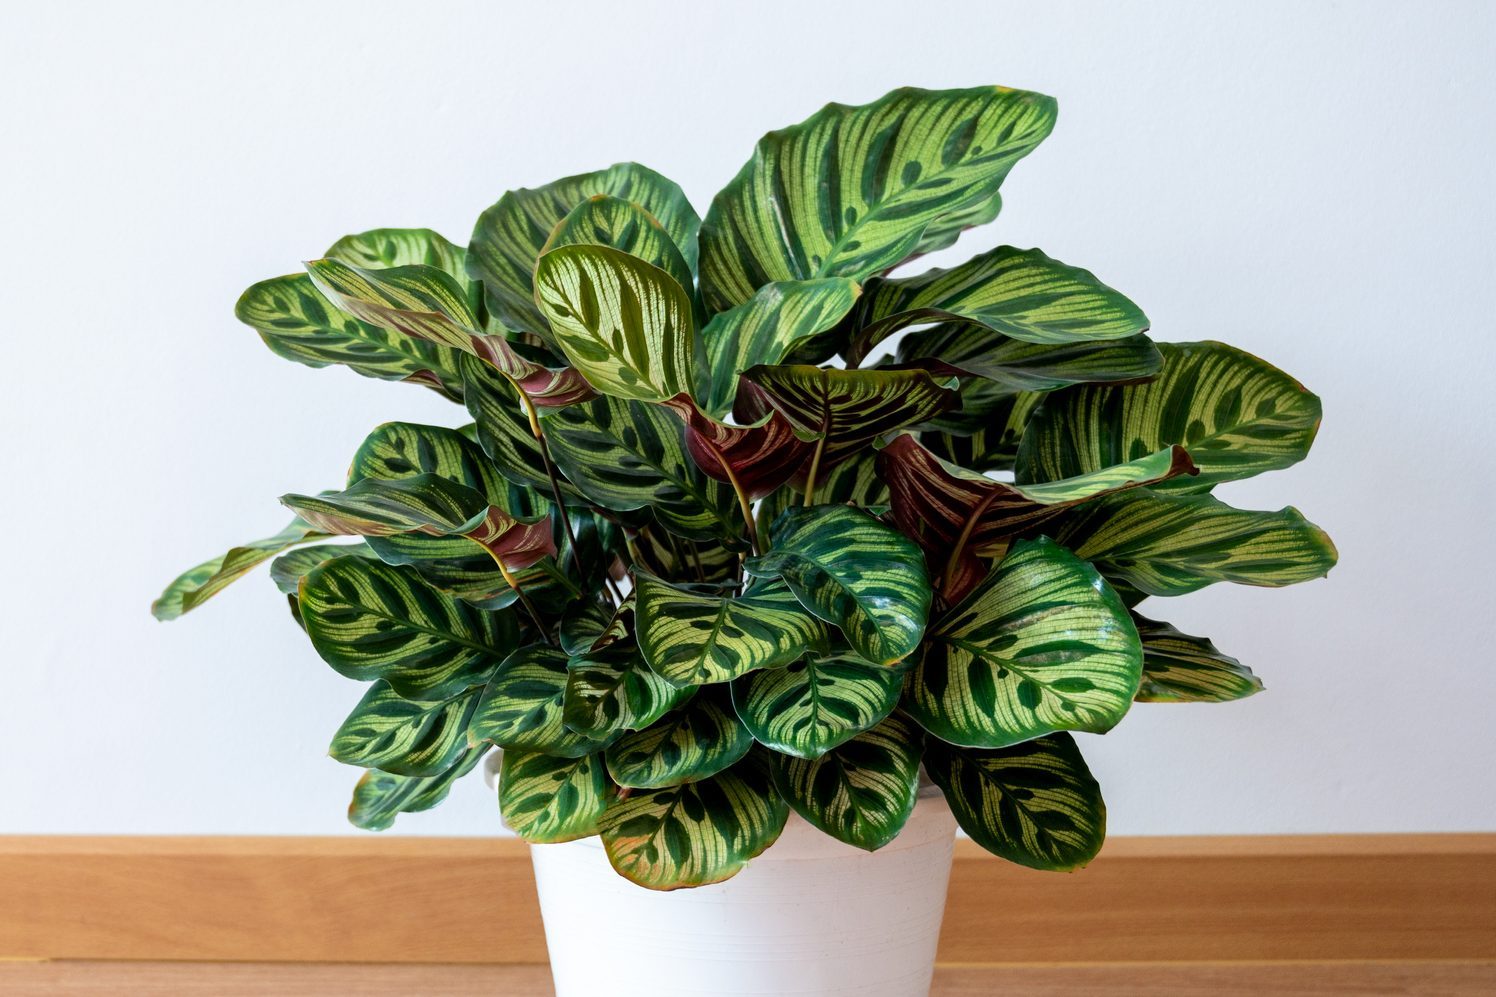 Calathea makoyana The plants are in white pots in the white wall decorated room.